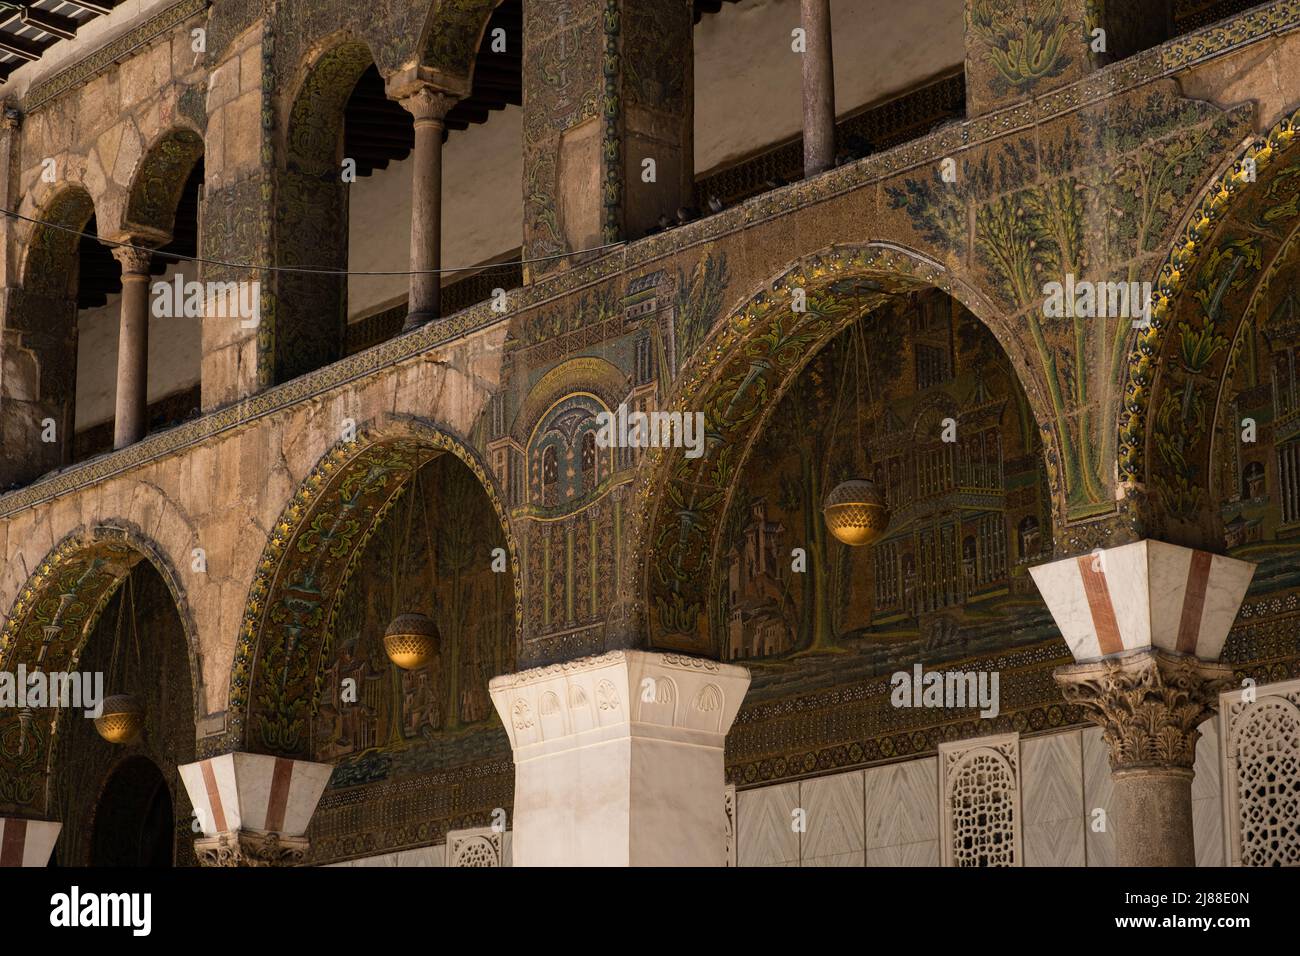 Damascus, Syria -May, 2022: Historic architecture details inside Umayyad Mosque,a.k.a. Great Mosque of Damascus Stock Photo